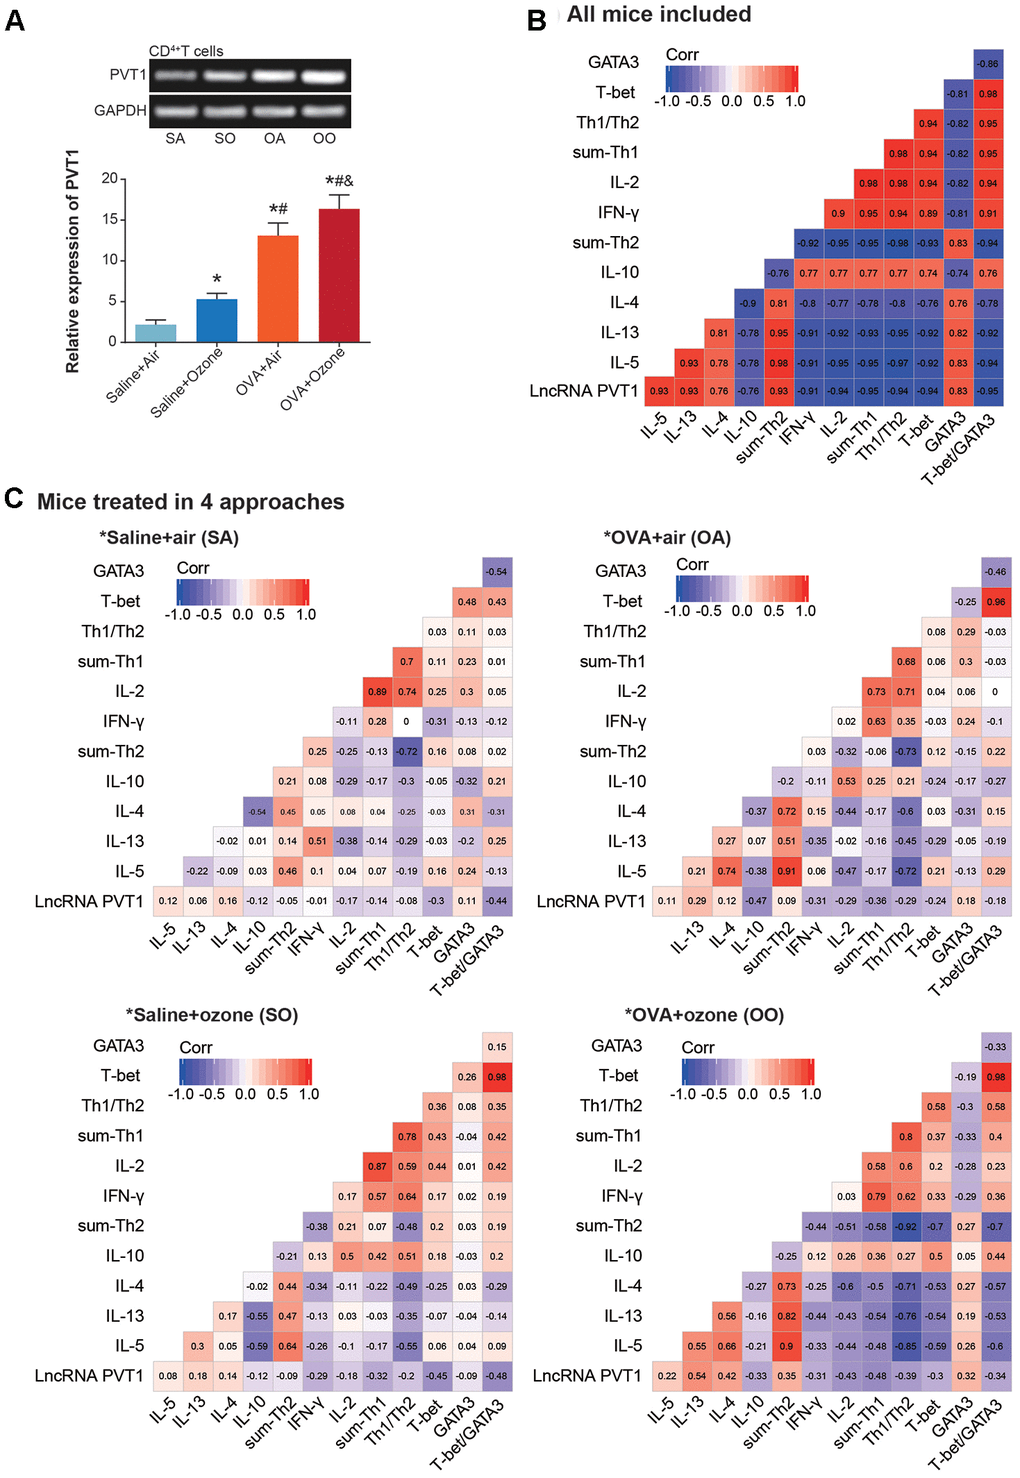 Linkage of lncRNA PVT1 expression with Th1/Th2 balance of asthmatic mice. (A) PVT1 expression was monitored within CD4+ T cells that were obtained from mice models of saline+air (SA), saline+ozone (SO), OVA+air (OA) and OVA+ozone (OO) groups. *: PPPB, C) Correlation matrixes were established concerning PVT1 expression and Th1/Th2-specific cytokines in all asthmatic mice (B) and in asthmatic mice managed through 4 approaches (C).